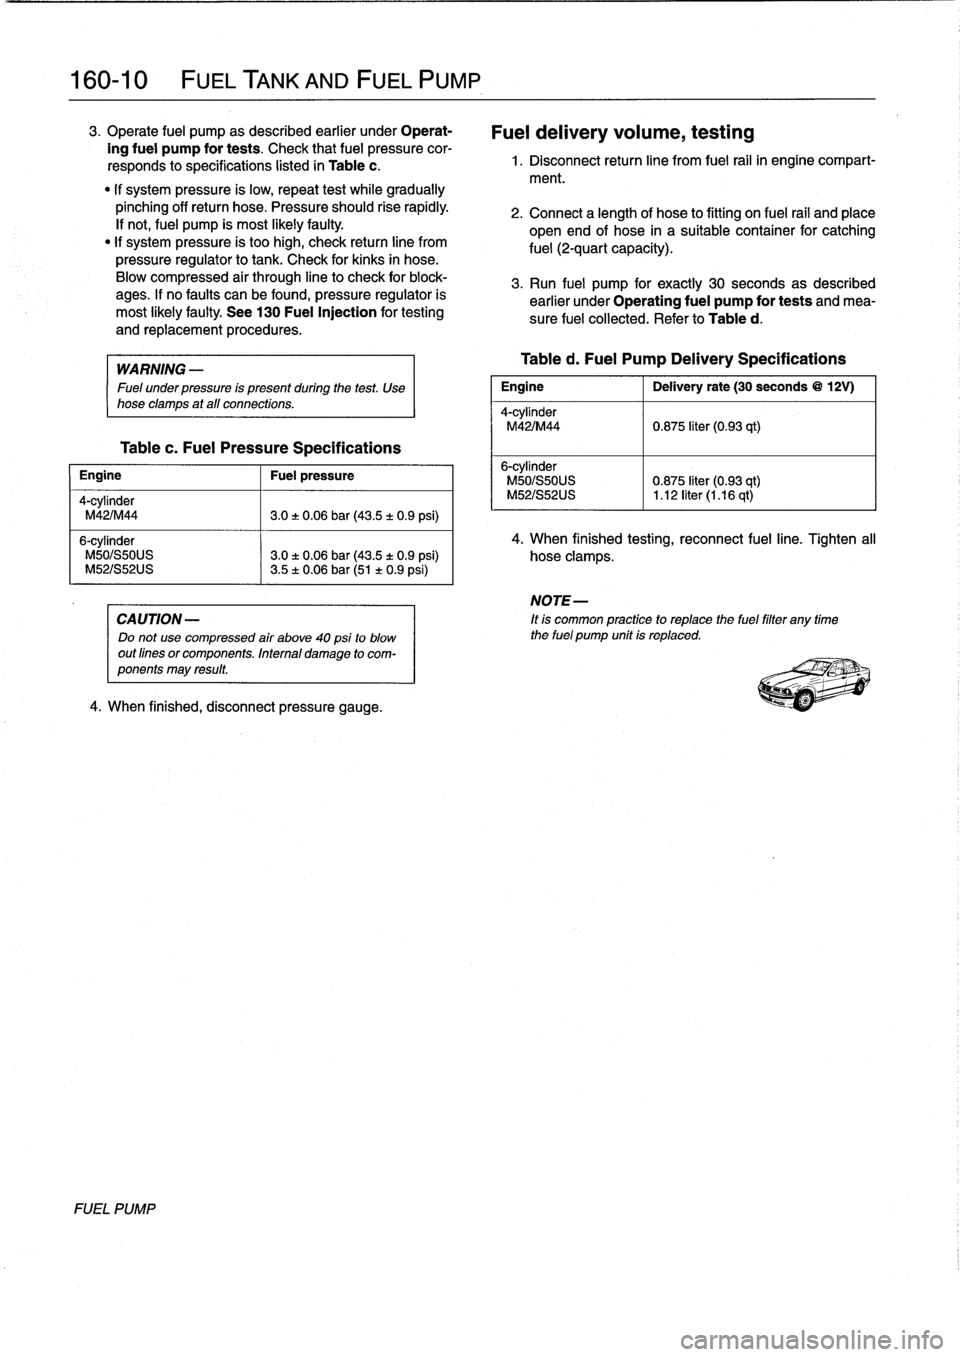 BMW 328i 1995 E36 Workshop Manual 
160-
1
0

	

FUEL
TANK
AND
FUEL
PUMP

3
.
Operate
fuel
pump
as
described
earlier
under
Operat-

ing
fuel
pump
for
tests
.
Check
that
fuel
pressure
cor-

responds
to
specifications
listed
in
Table
c
.